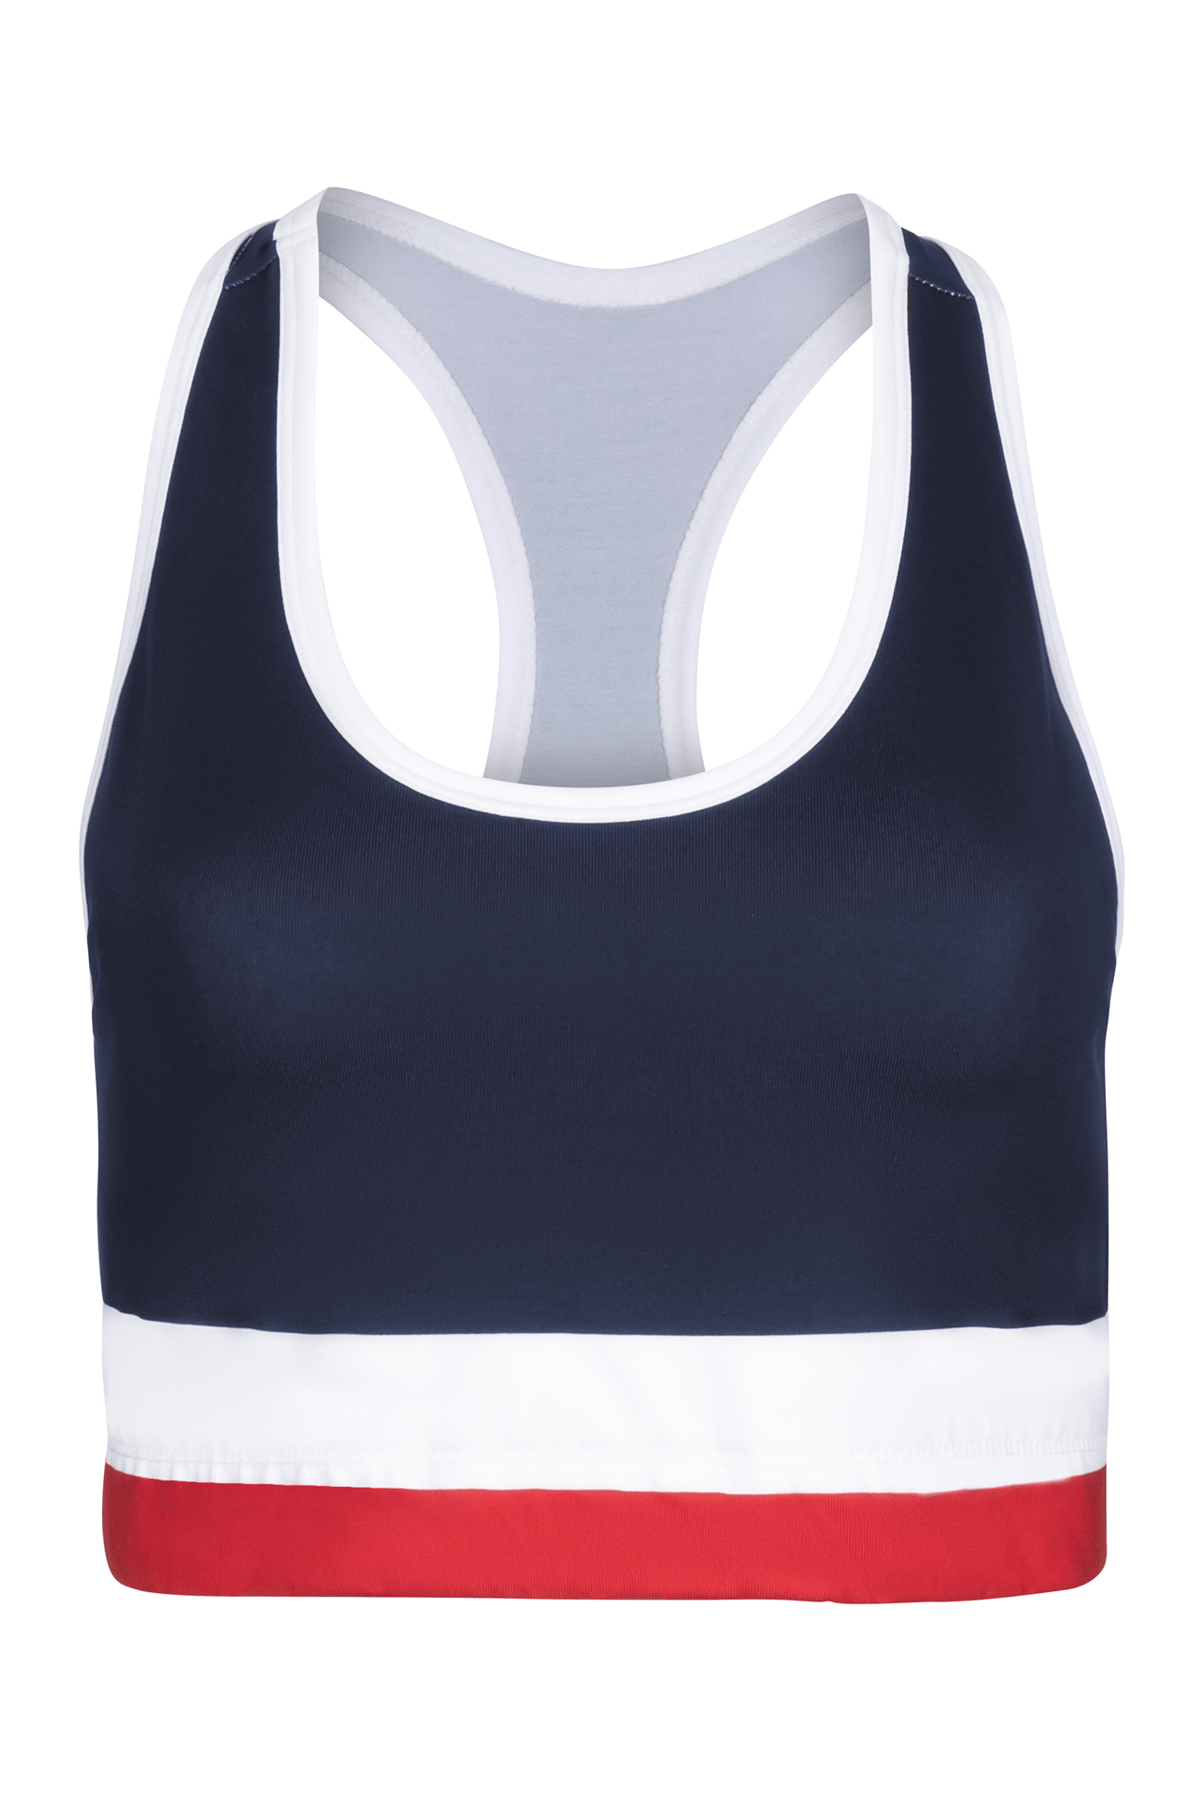 Crivit Sports Top - Small Blue Polyester